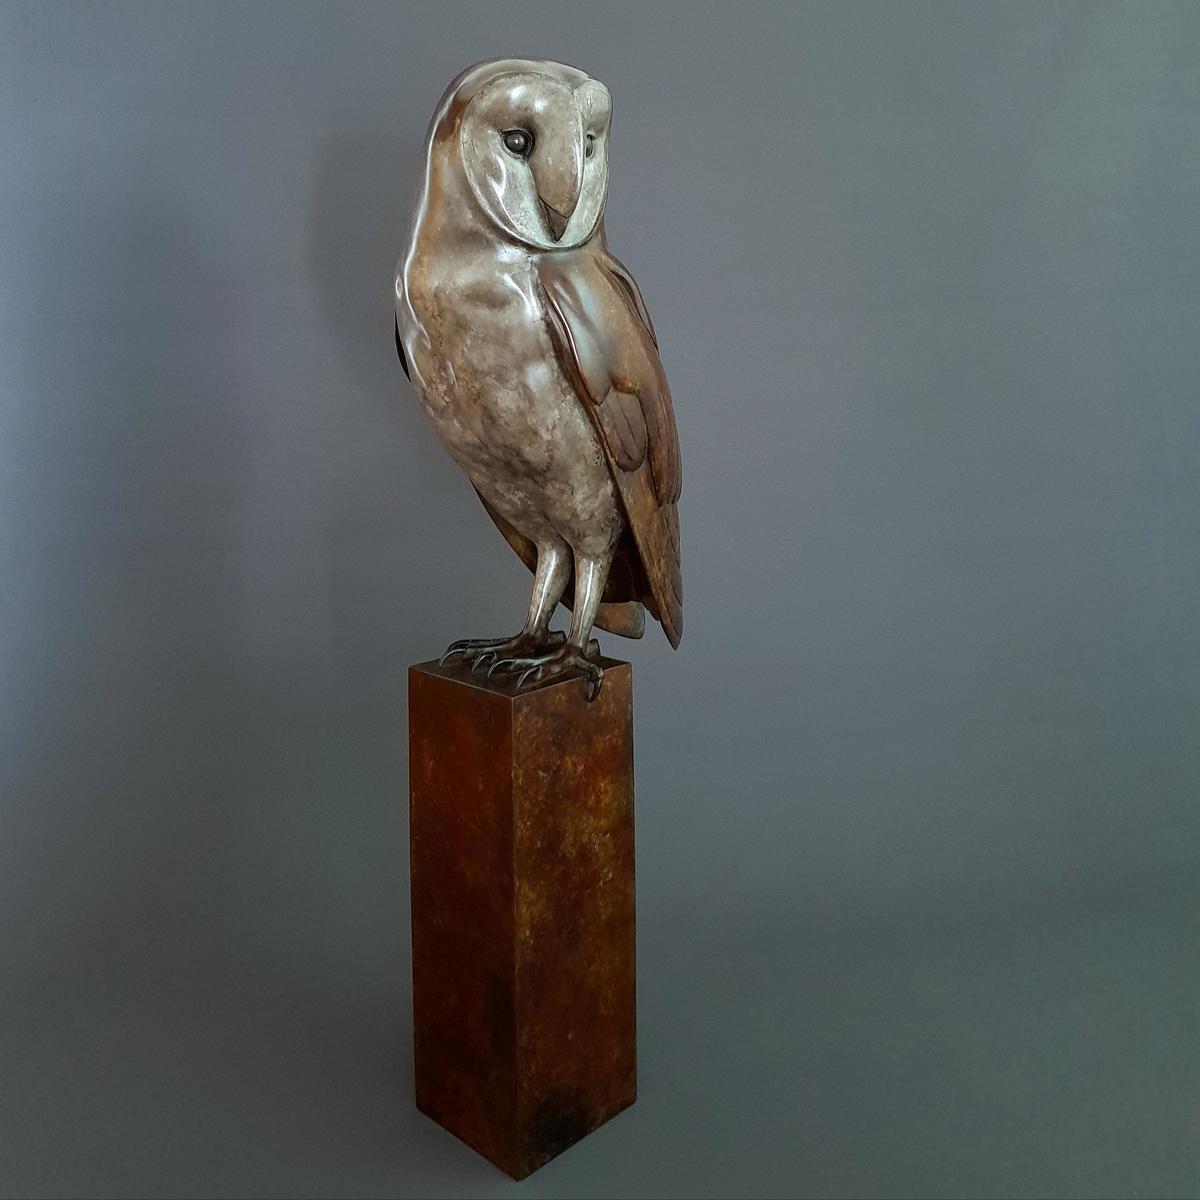 From Dusk to Dawn (Barn Owl) Life-size